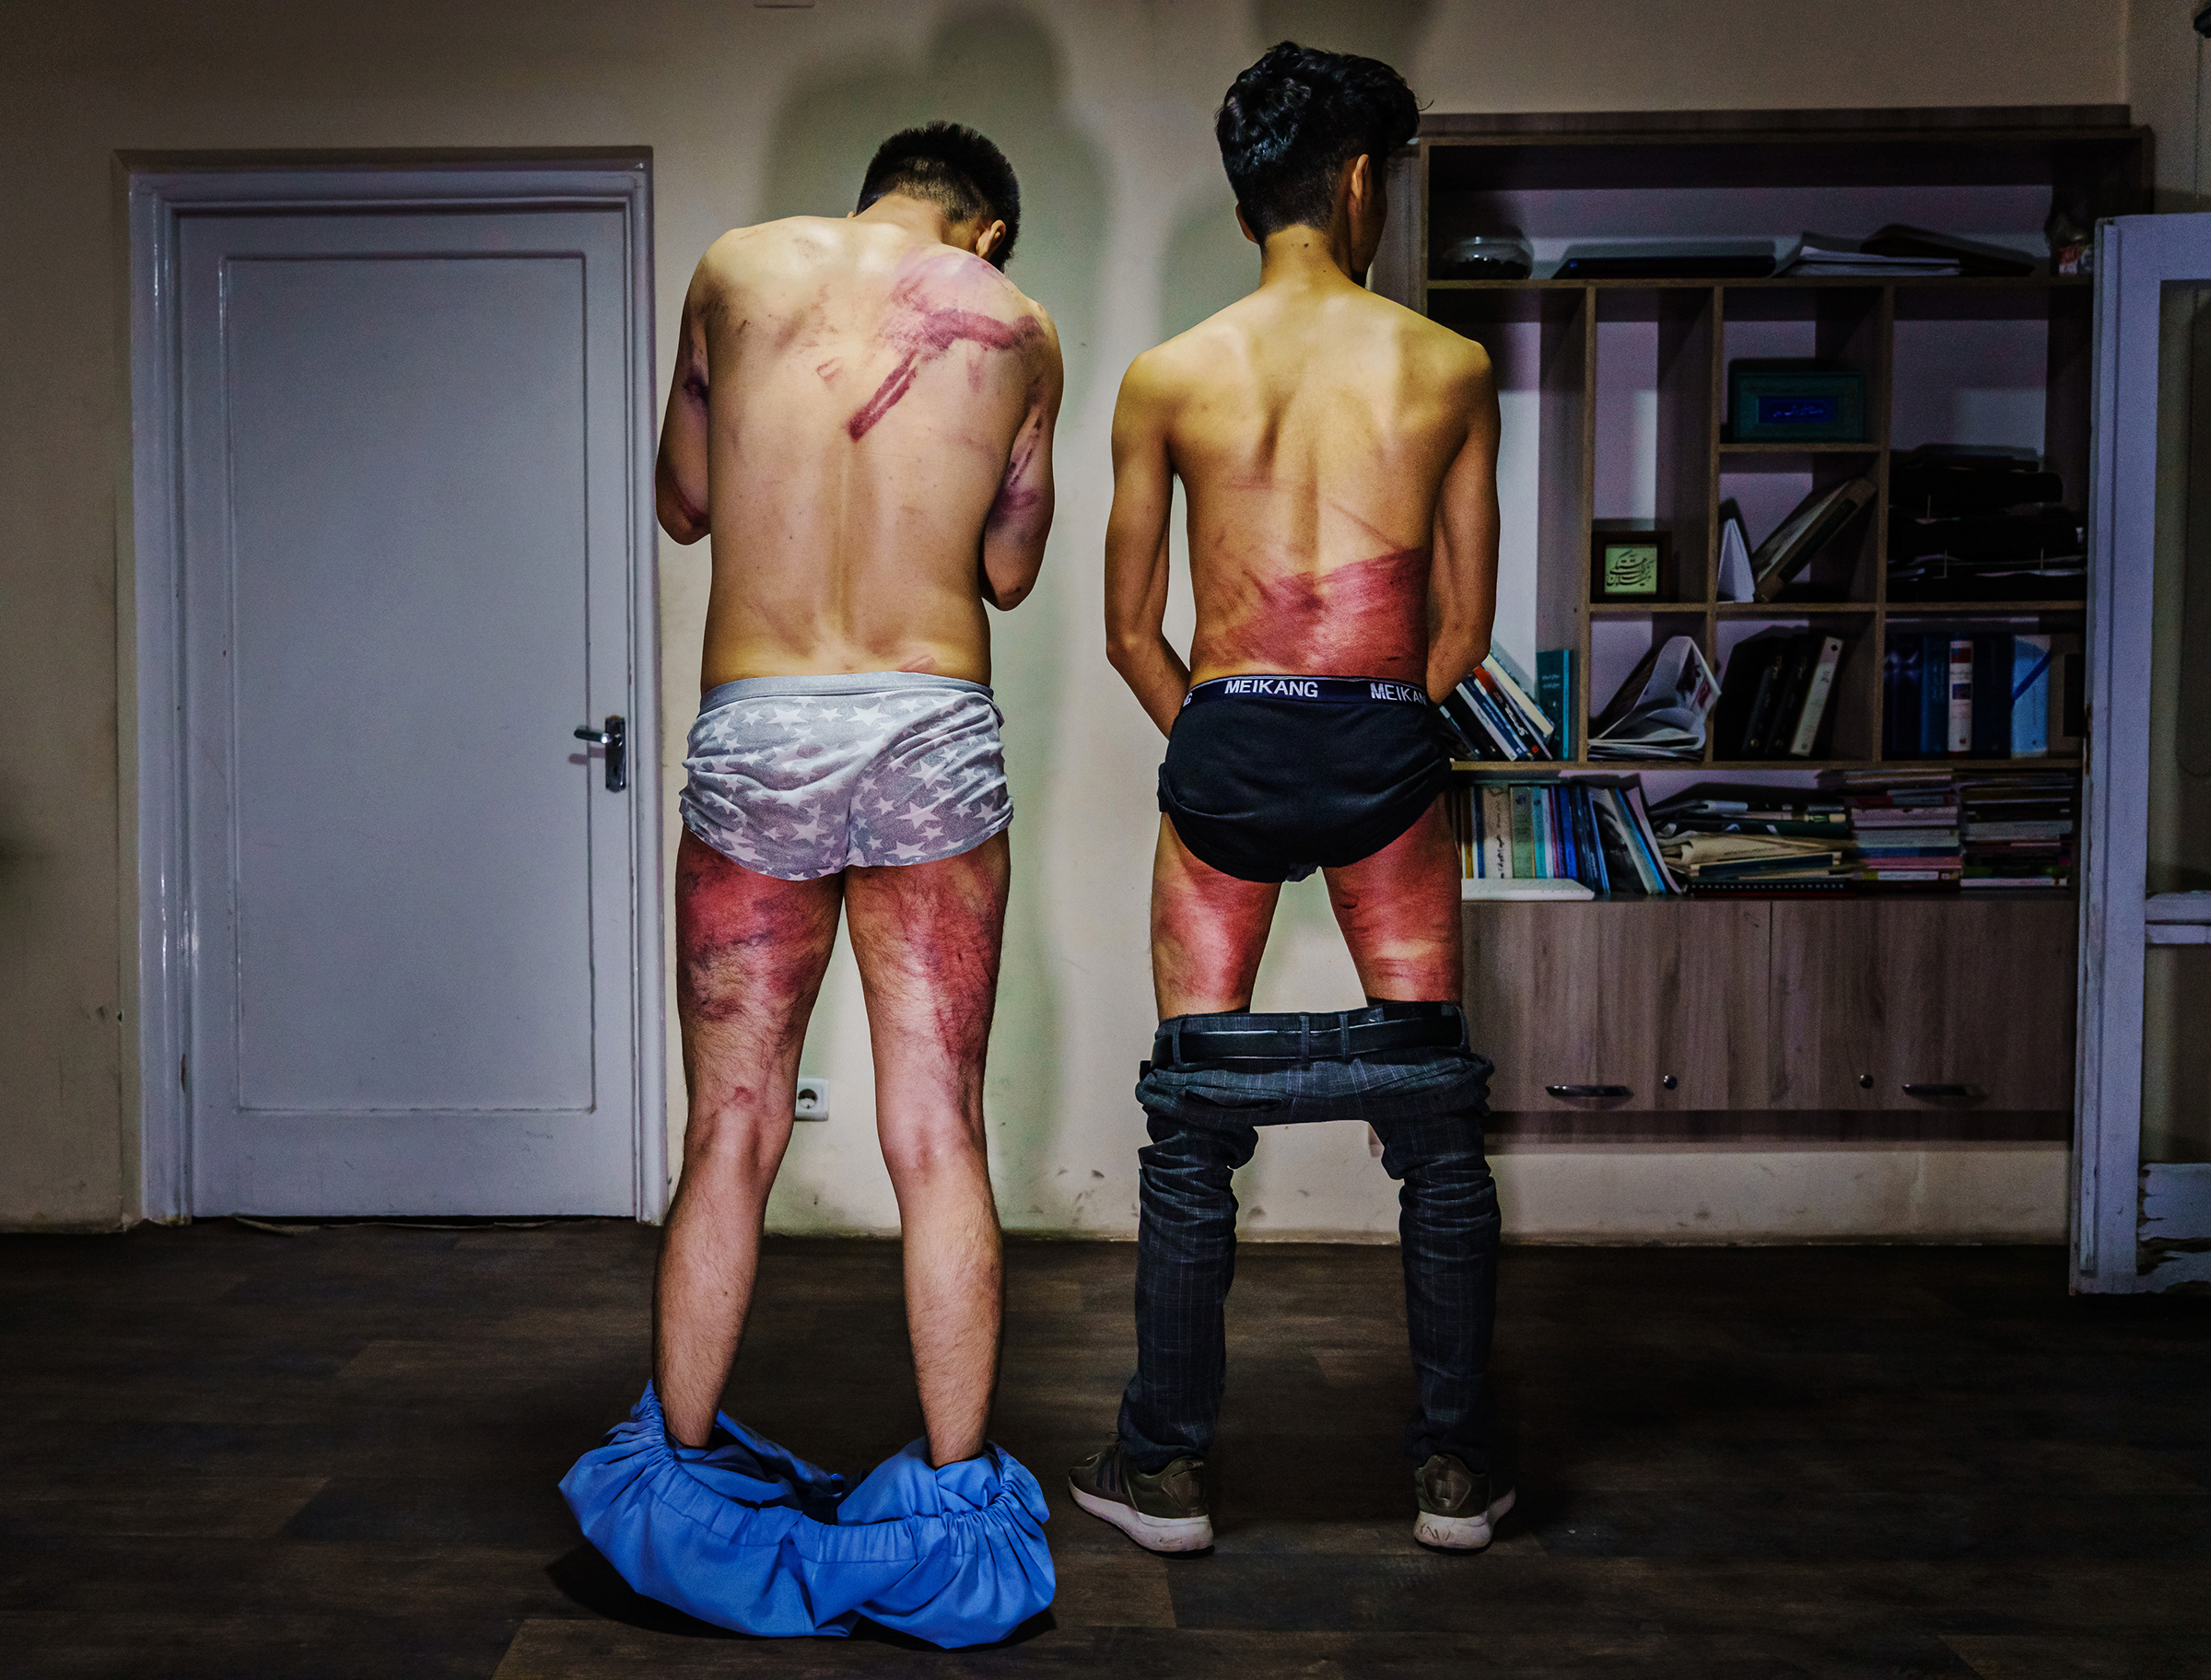 Journalists from the Etilaatroz newspaper, Nemat Naqdi, 28, left and Taqi Daryabi, 22, undress to <a href="https://www.latimes.com/world-nation/story/2021-09-08/women-protest-against-taliban-responds-with-force">show their wounds</a> after they were arrested, tortured and beaten by Taliban fighters for reporting on a women's rights protest, in Kabul on Sept. 8. (Marcus Yam—Los Angeles Times/Getty Images)